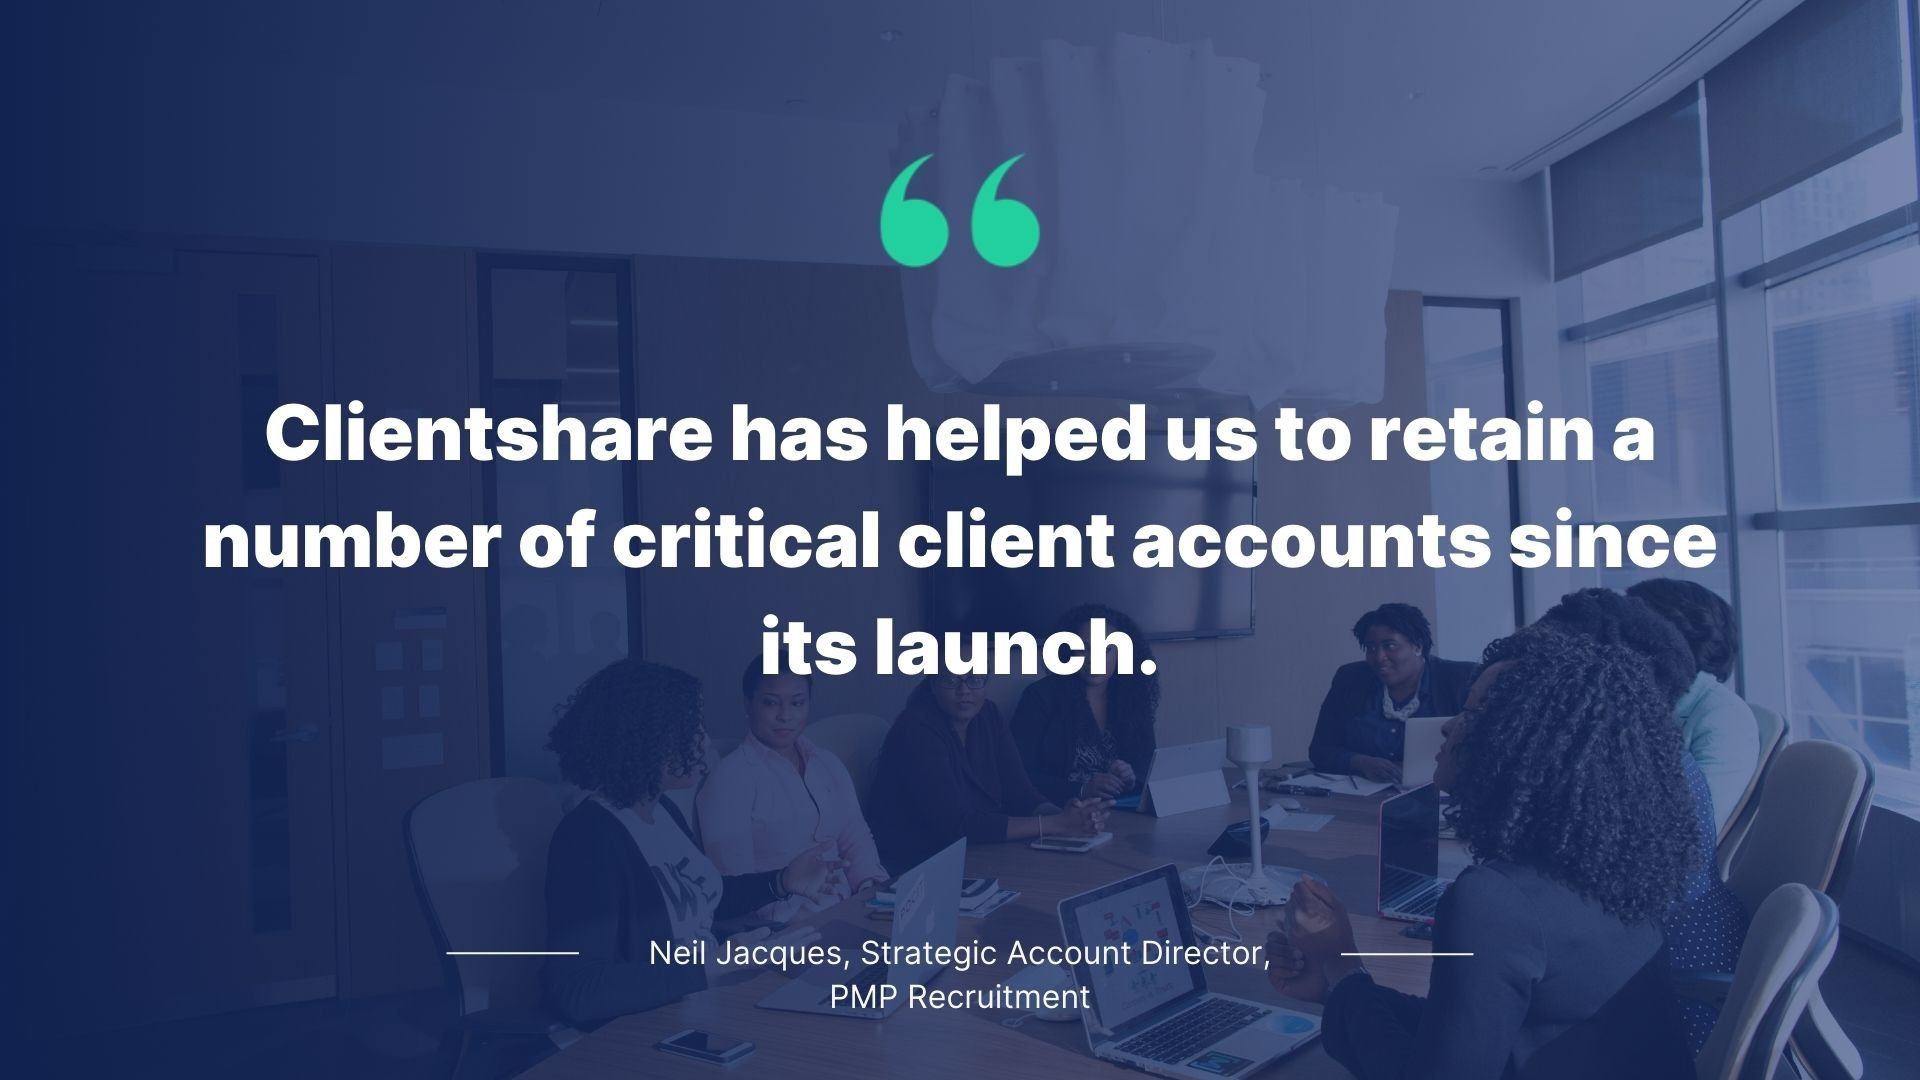 Quote y Neil Jacques, Strategic Account Director, PMP Recruitment: Clientshare has helped us to retain a number of critical client accounts since its launch.